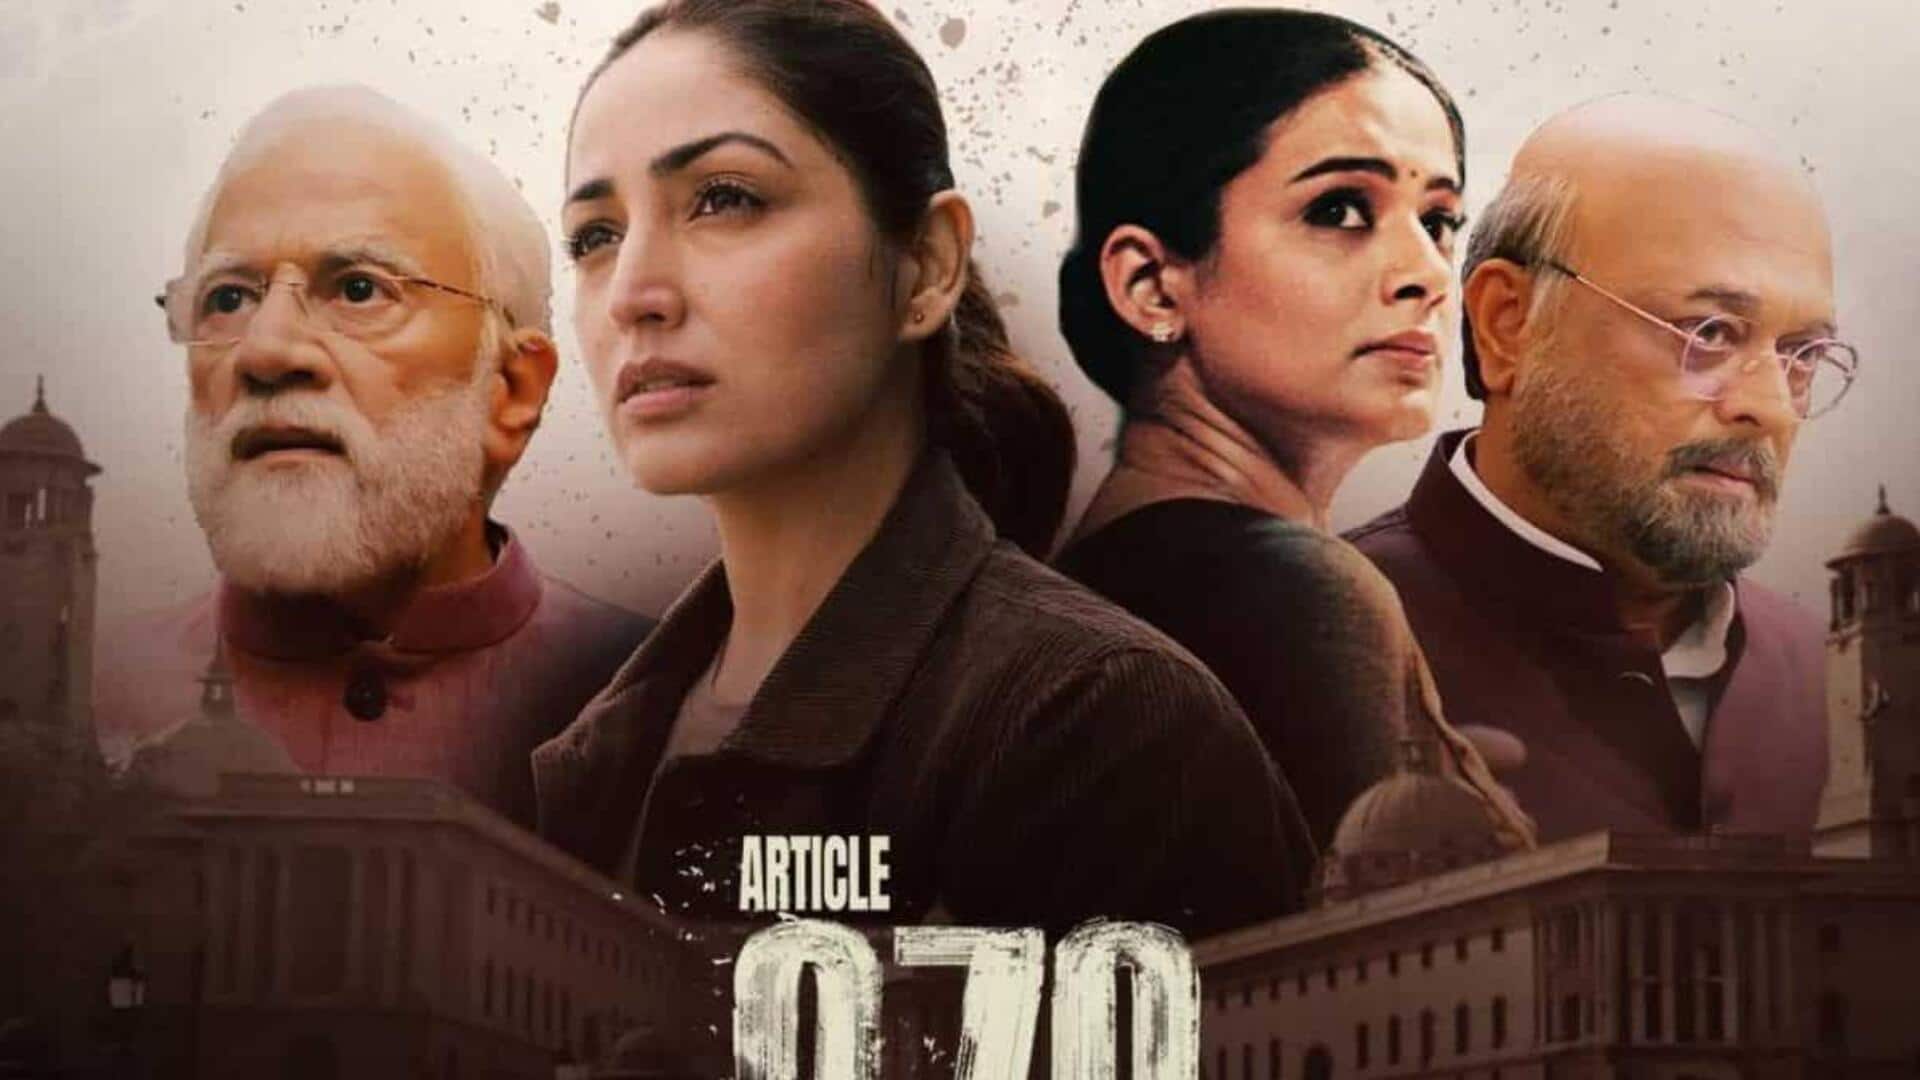 Box office collection: 'Article 370' slows down in fourth week